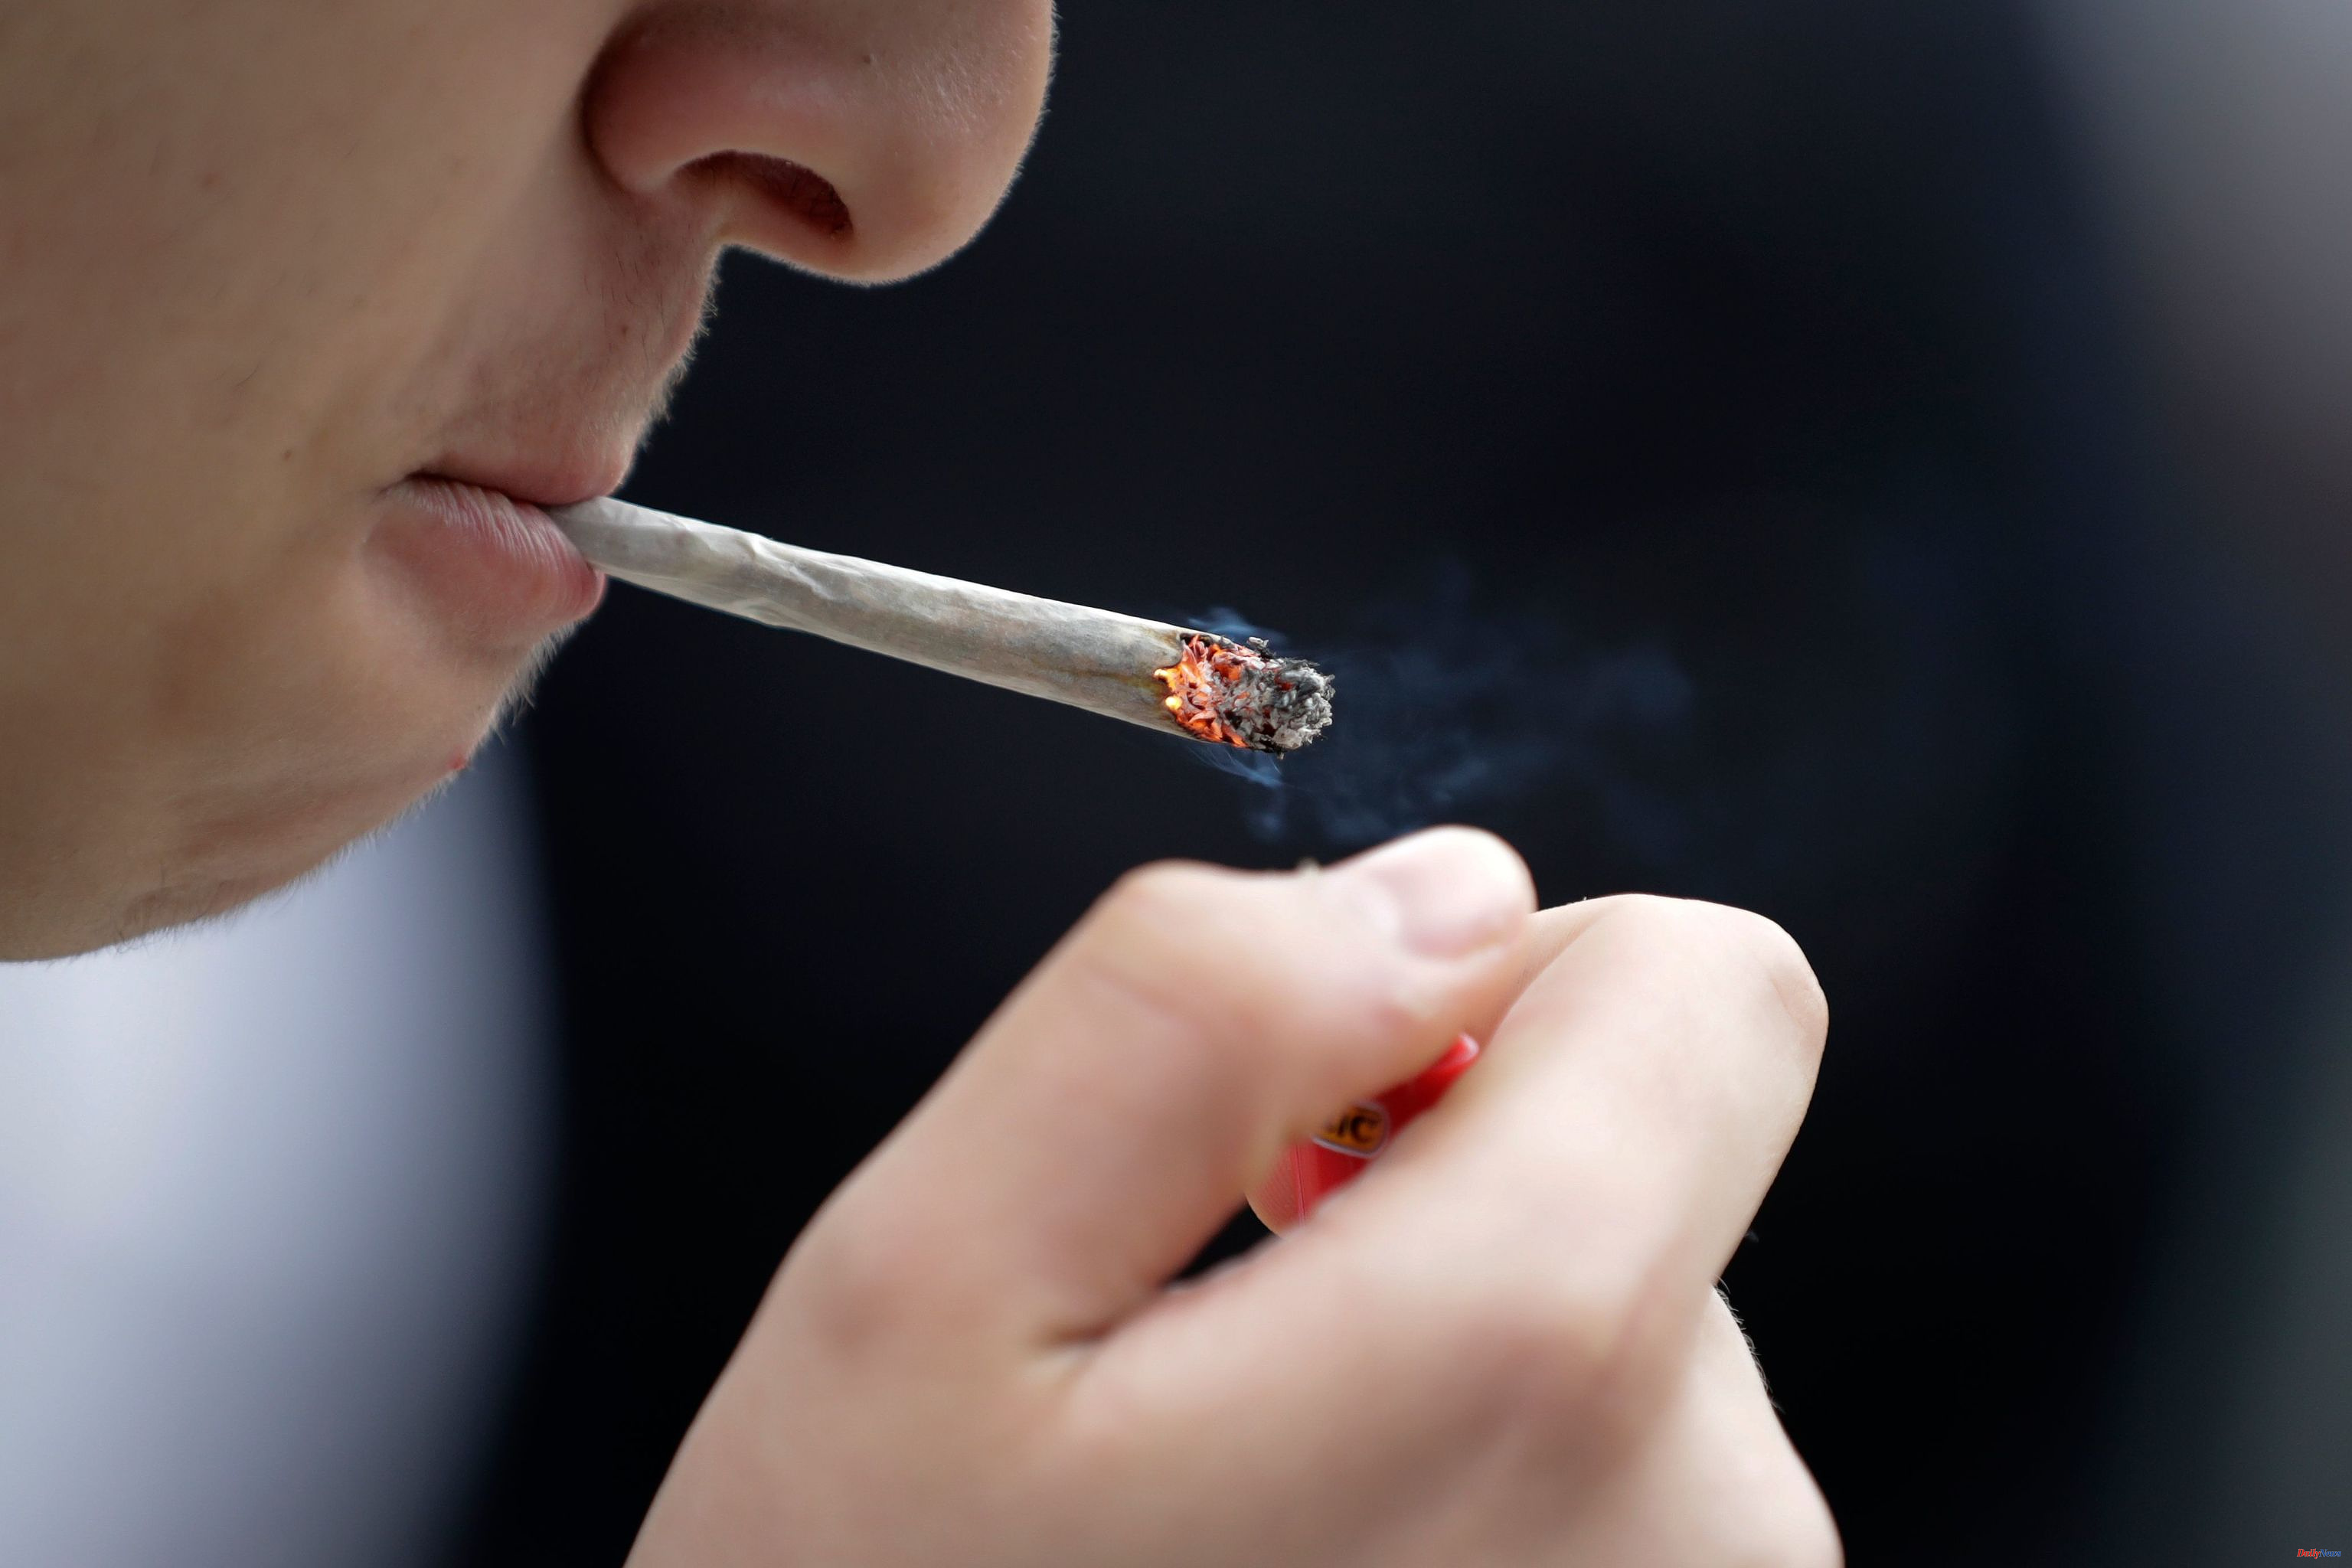 Spain A third of young people would smoke more cannabis or would try it if its consumption were regulated